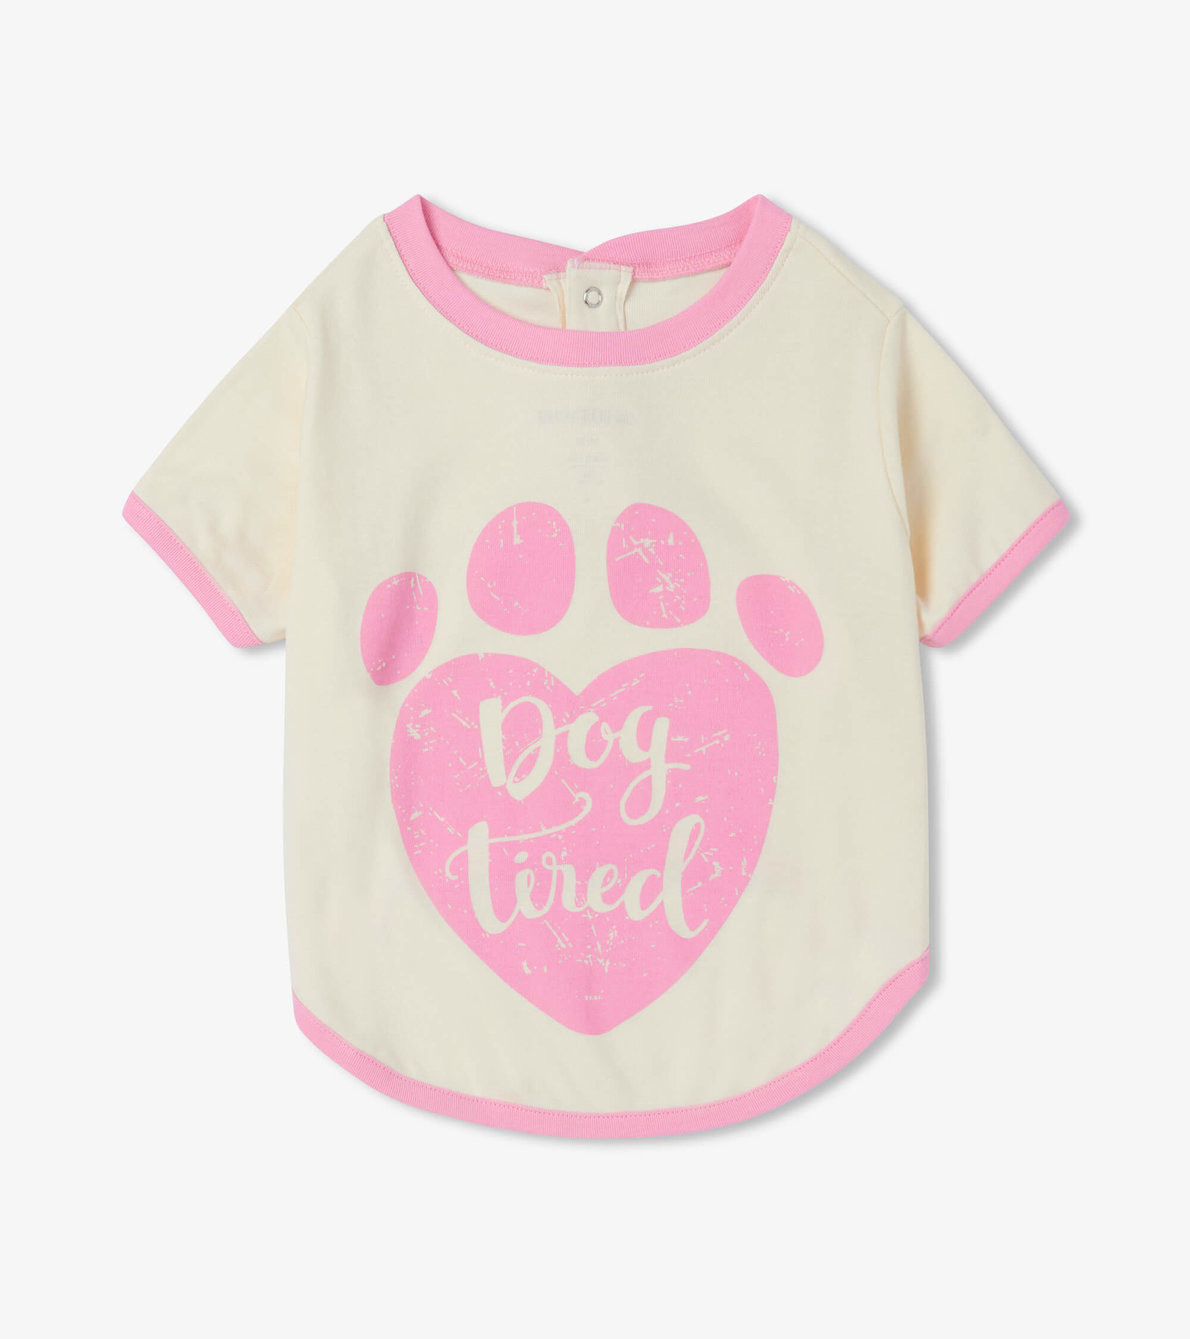 View larger image of Dog Tired Dog Tee